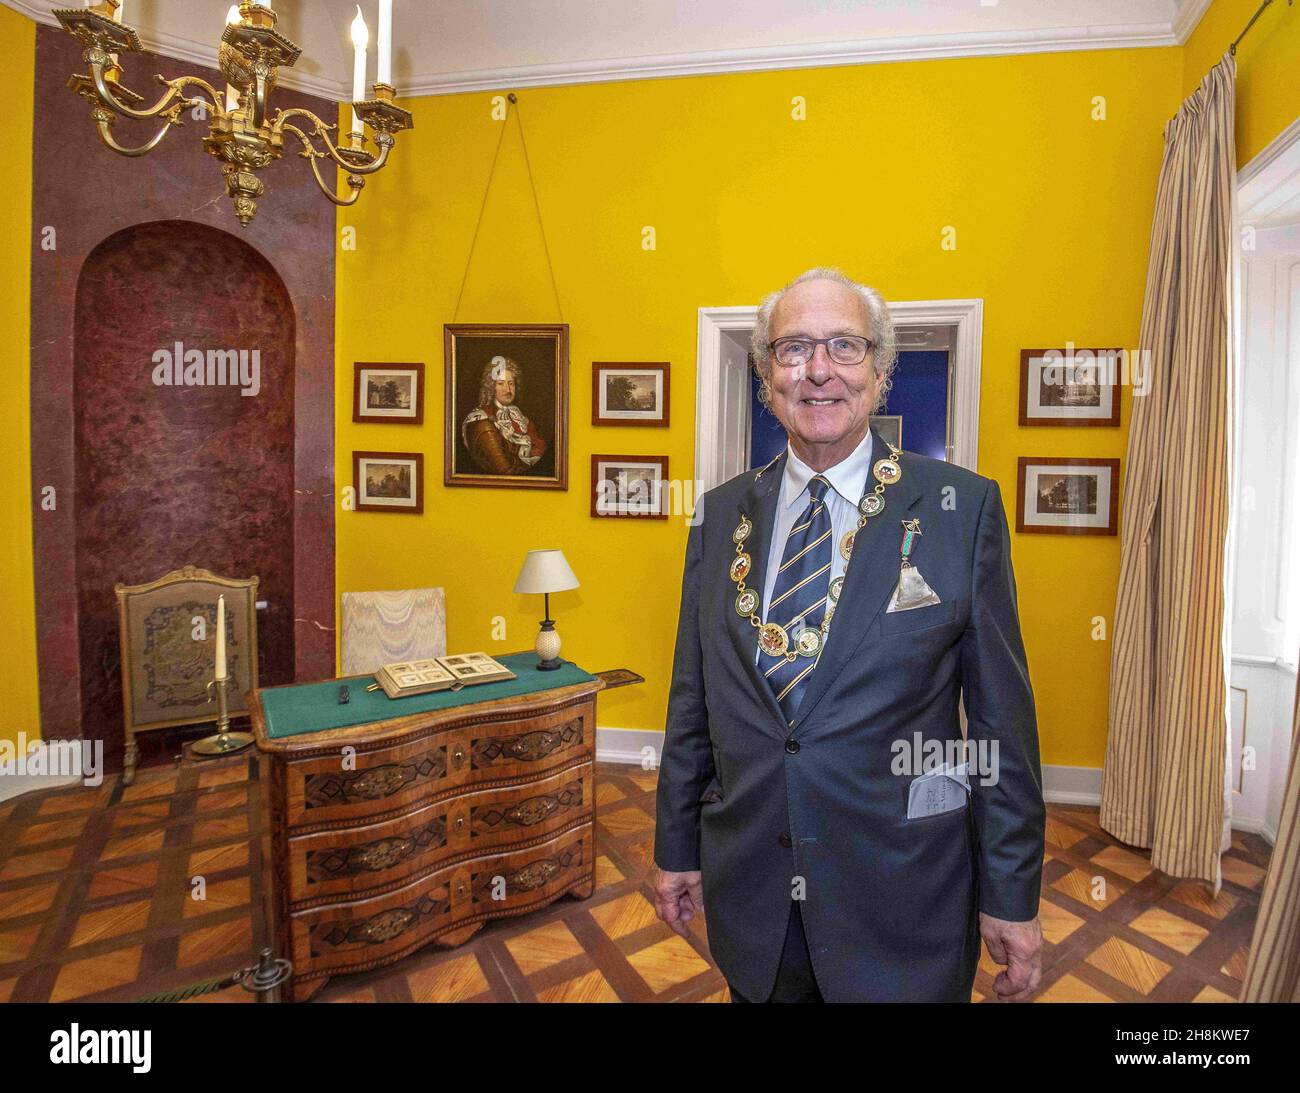 Ballenstedt, Germany. 22nd Sep, 2018. Eduard Prince of Anhalt at the opening of the exhibition 'Courtly Living' at Ballenstedt Castle. The prince will be 80 years old on December 3. (to dpa 'Celebrations will not take place until May 2022 - Eduard Prince of Anhalt turns 80') Credit: Jürgen Meusel/dpa-Zentralbild/dpa/Alamy Live News Stock Photo